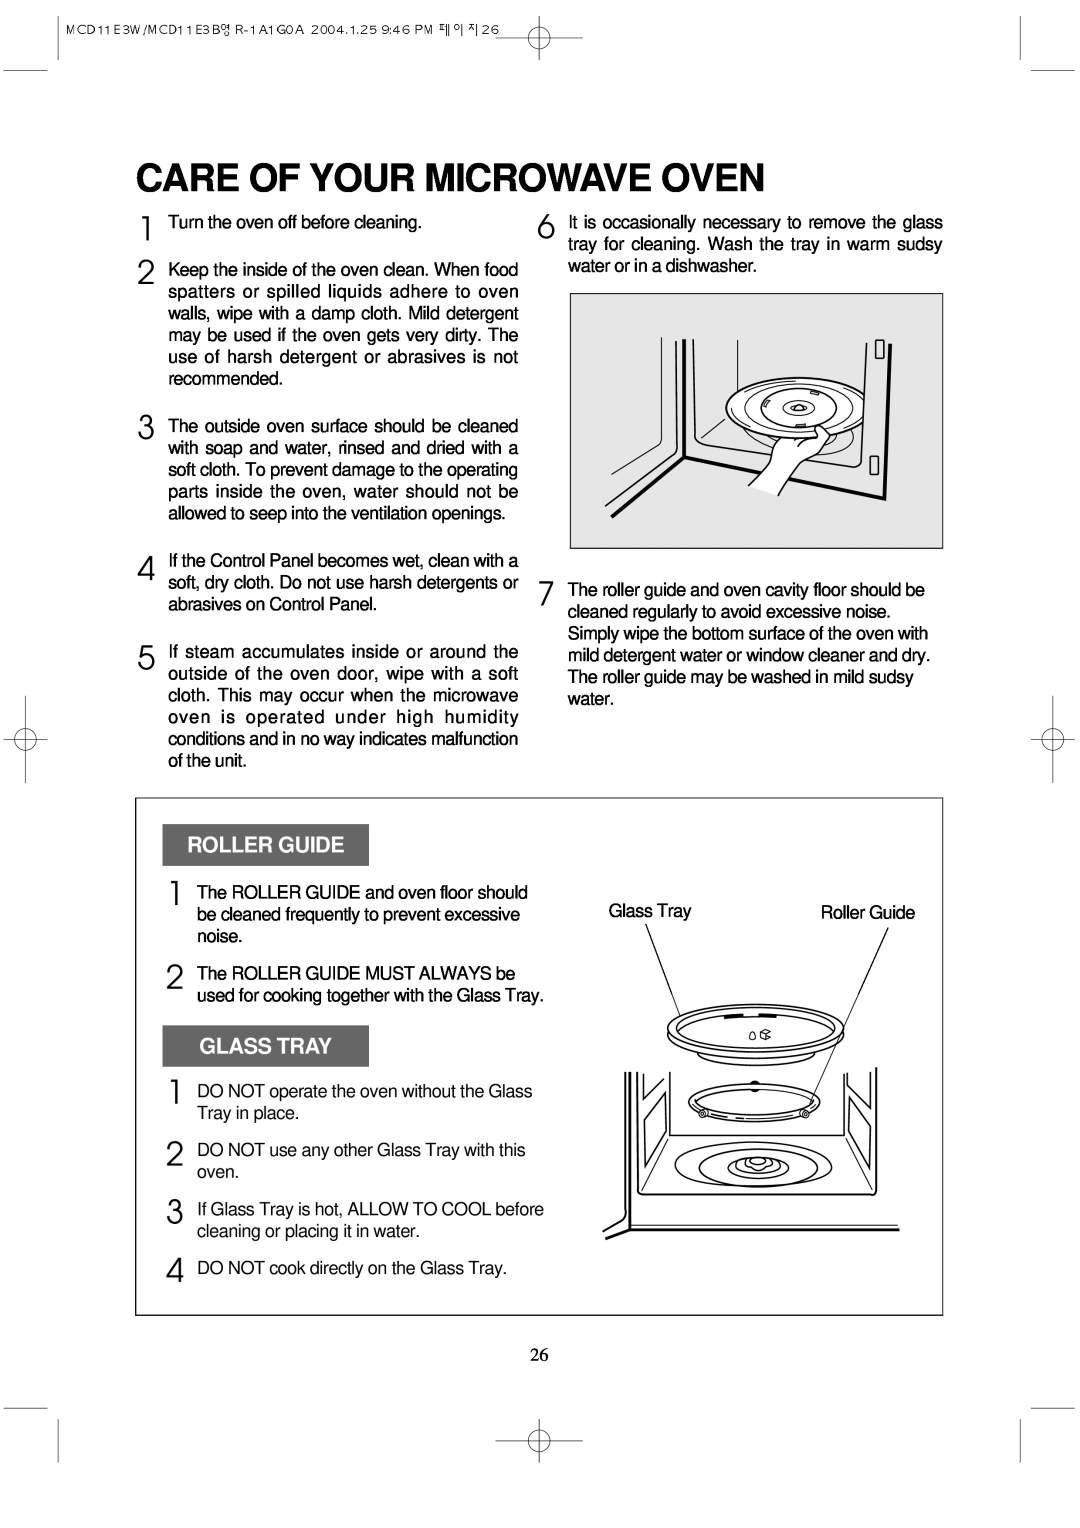 Magic Chef MCD11E3B instruction manual Care Of Your Microwave Oven, Roller Guide, Glass Tray 